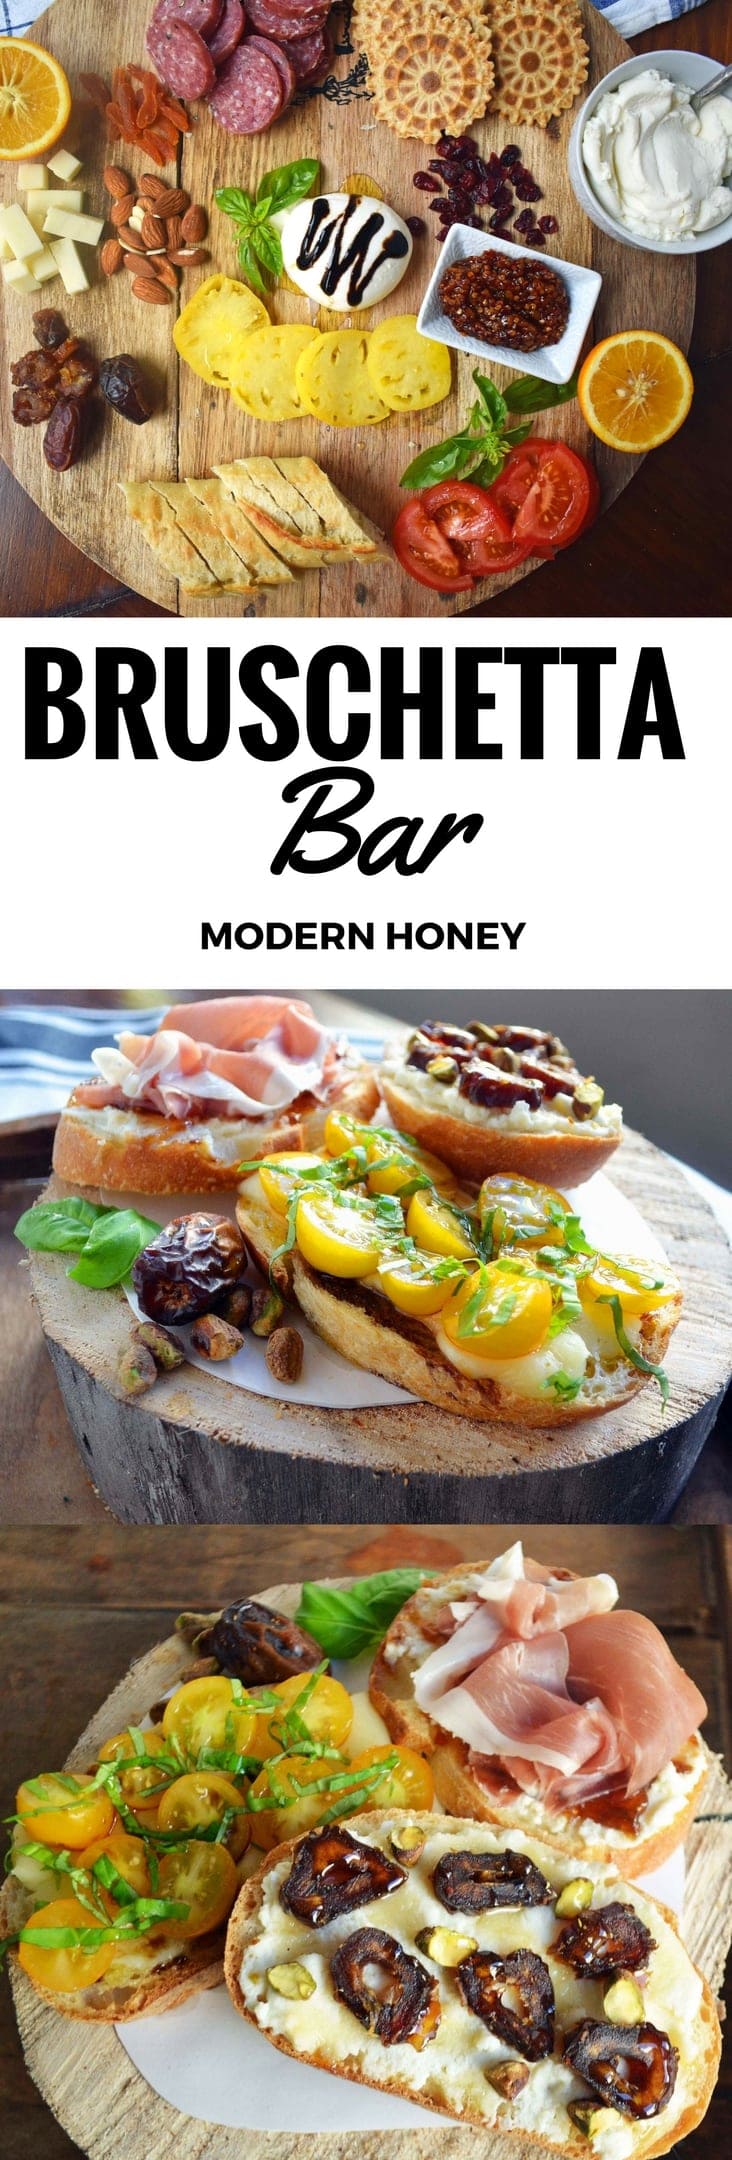 Ultimate Bruschetta Bar by Modern Honey. How to make a perfect bruschetta or charcuterie board using fresh meats, cheeses, fruits, breads, nuts, roasted vegetables, and fresh herbs. It's the perfect party appetizer. Bruschetta topping ideas plus flavor combinations.